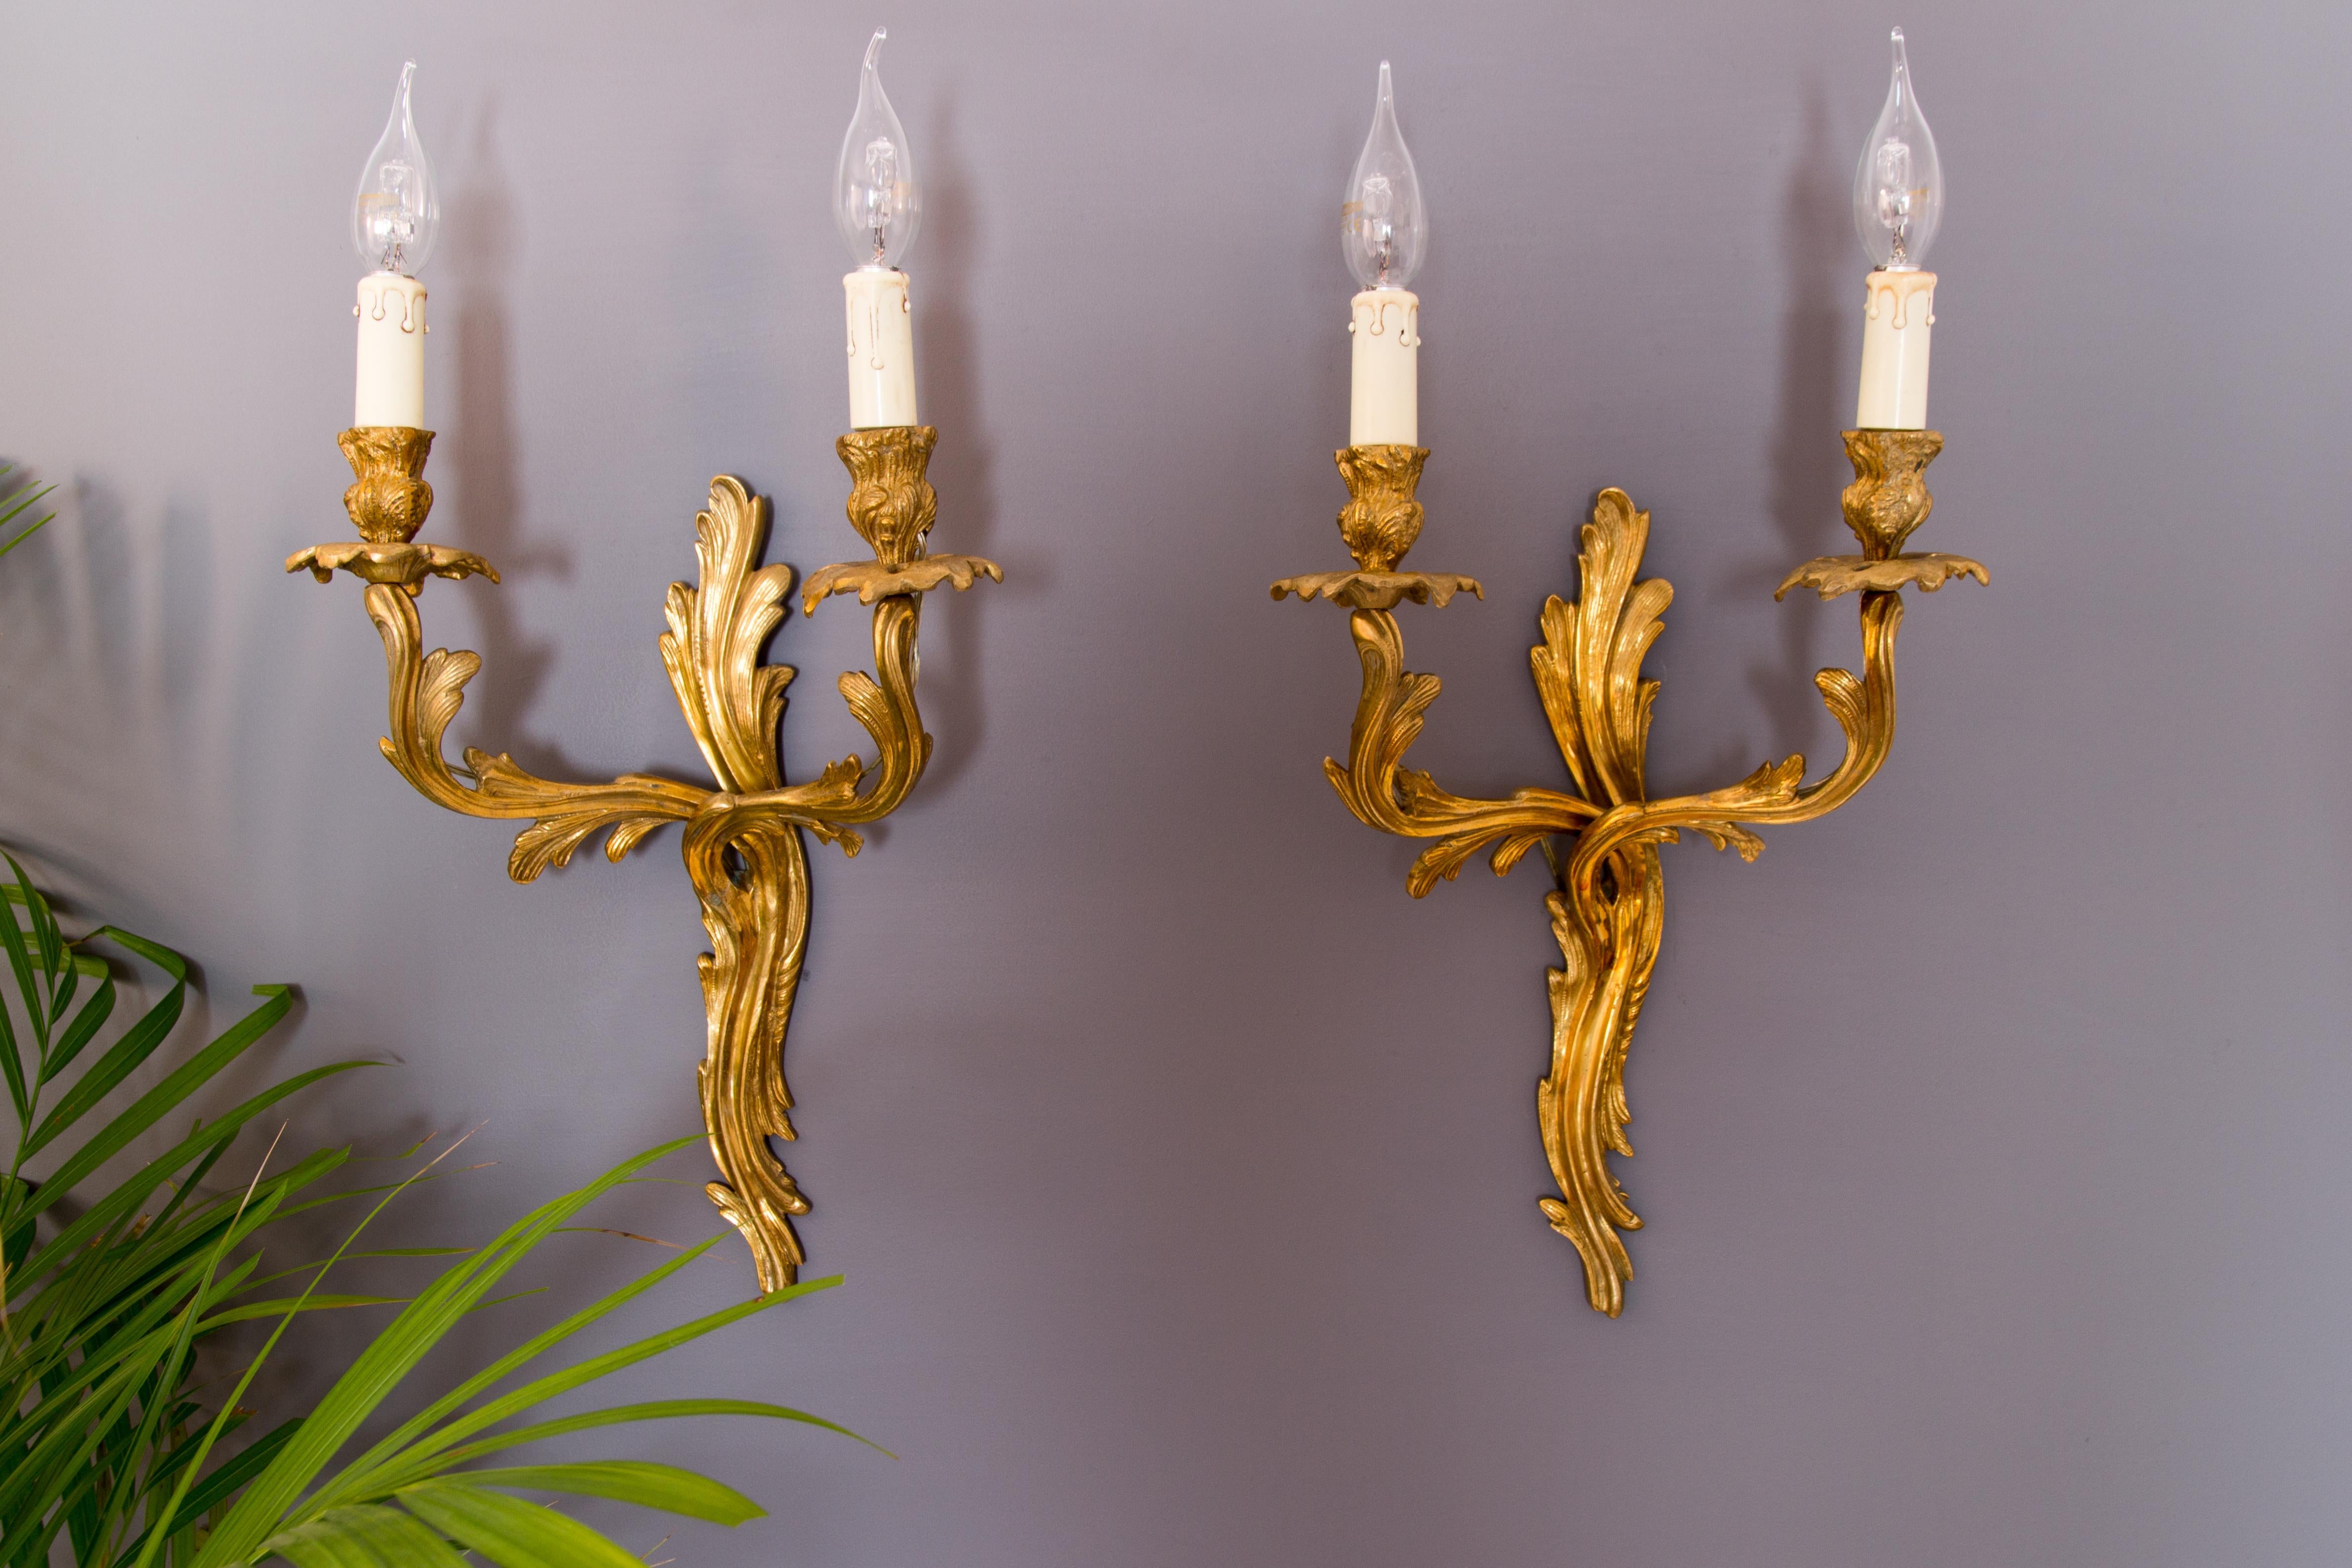 Large Louis XV French Rococo style two-arm sconces. Curvy asymmetrical acanthus leaf-like gilt bronze scrolls in Classic French Rococo style. Each arm has sockets for E14 size light bulbs. France, circa the 1930s.
Dimensions (each sconce without